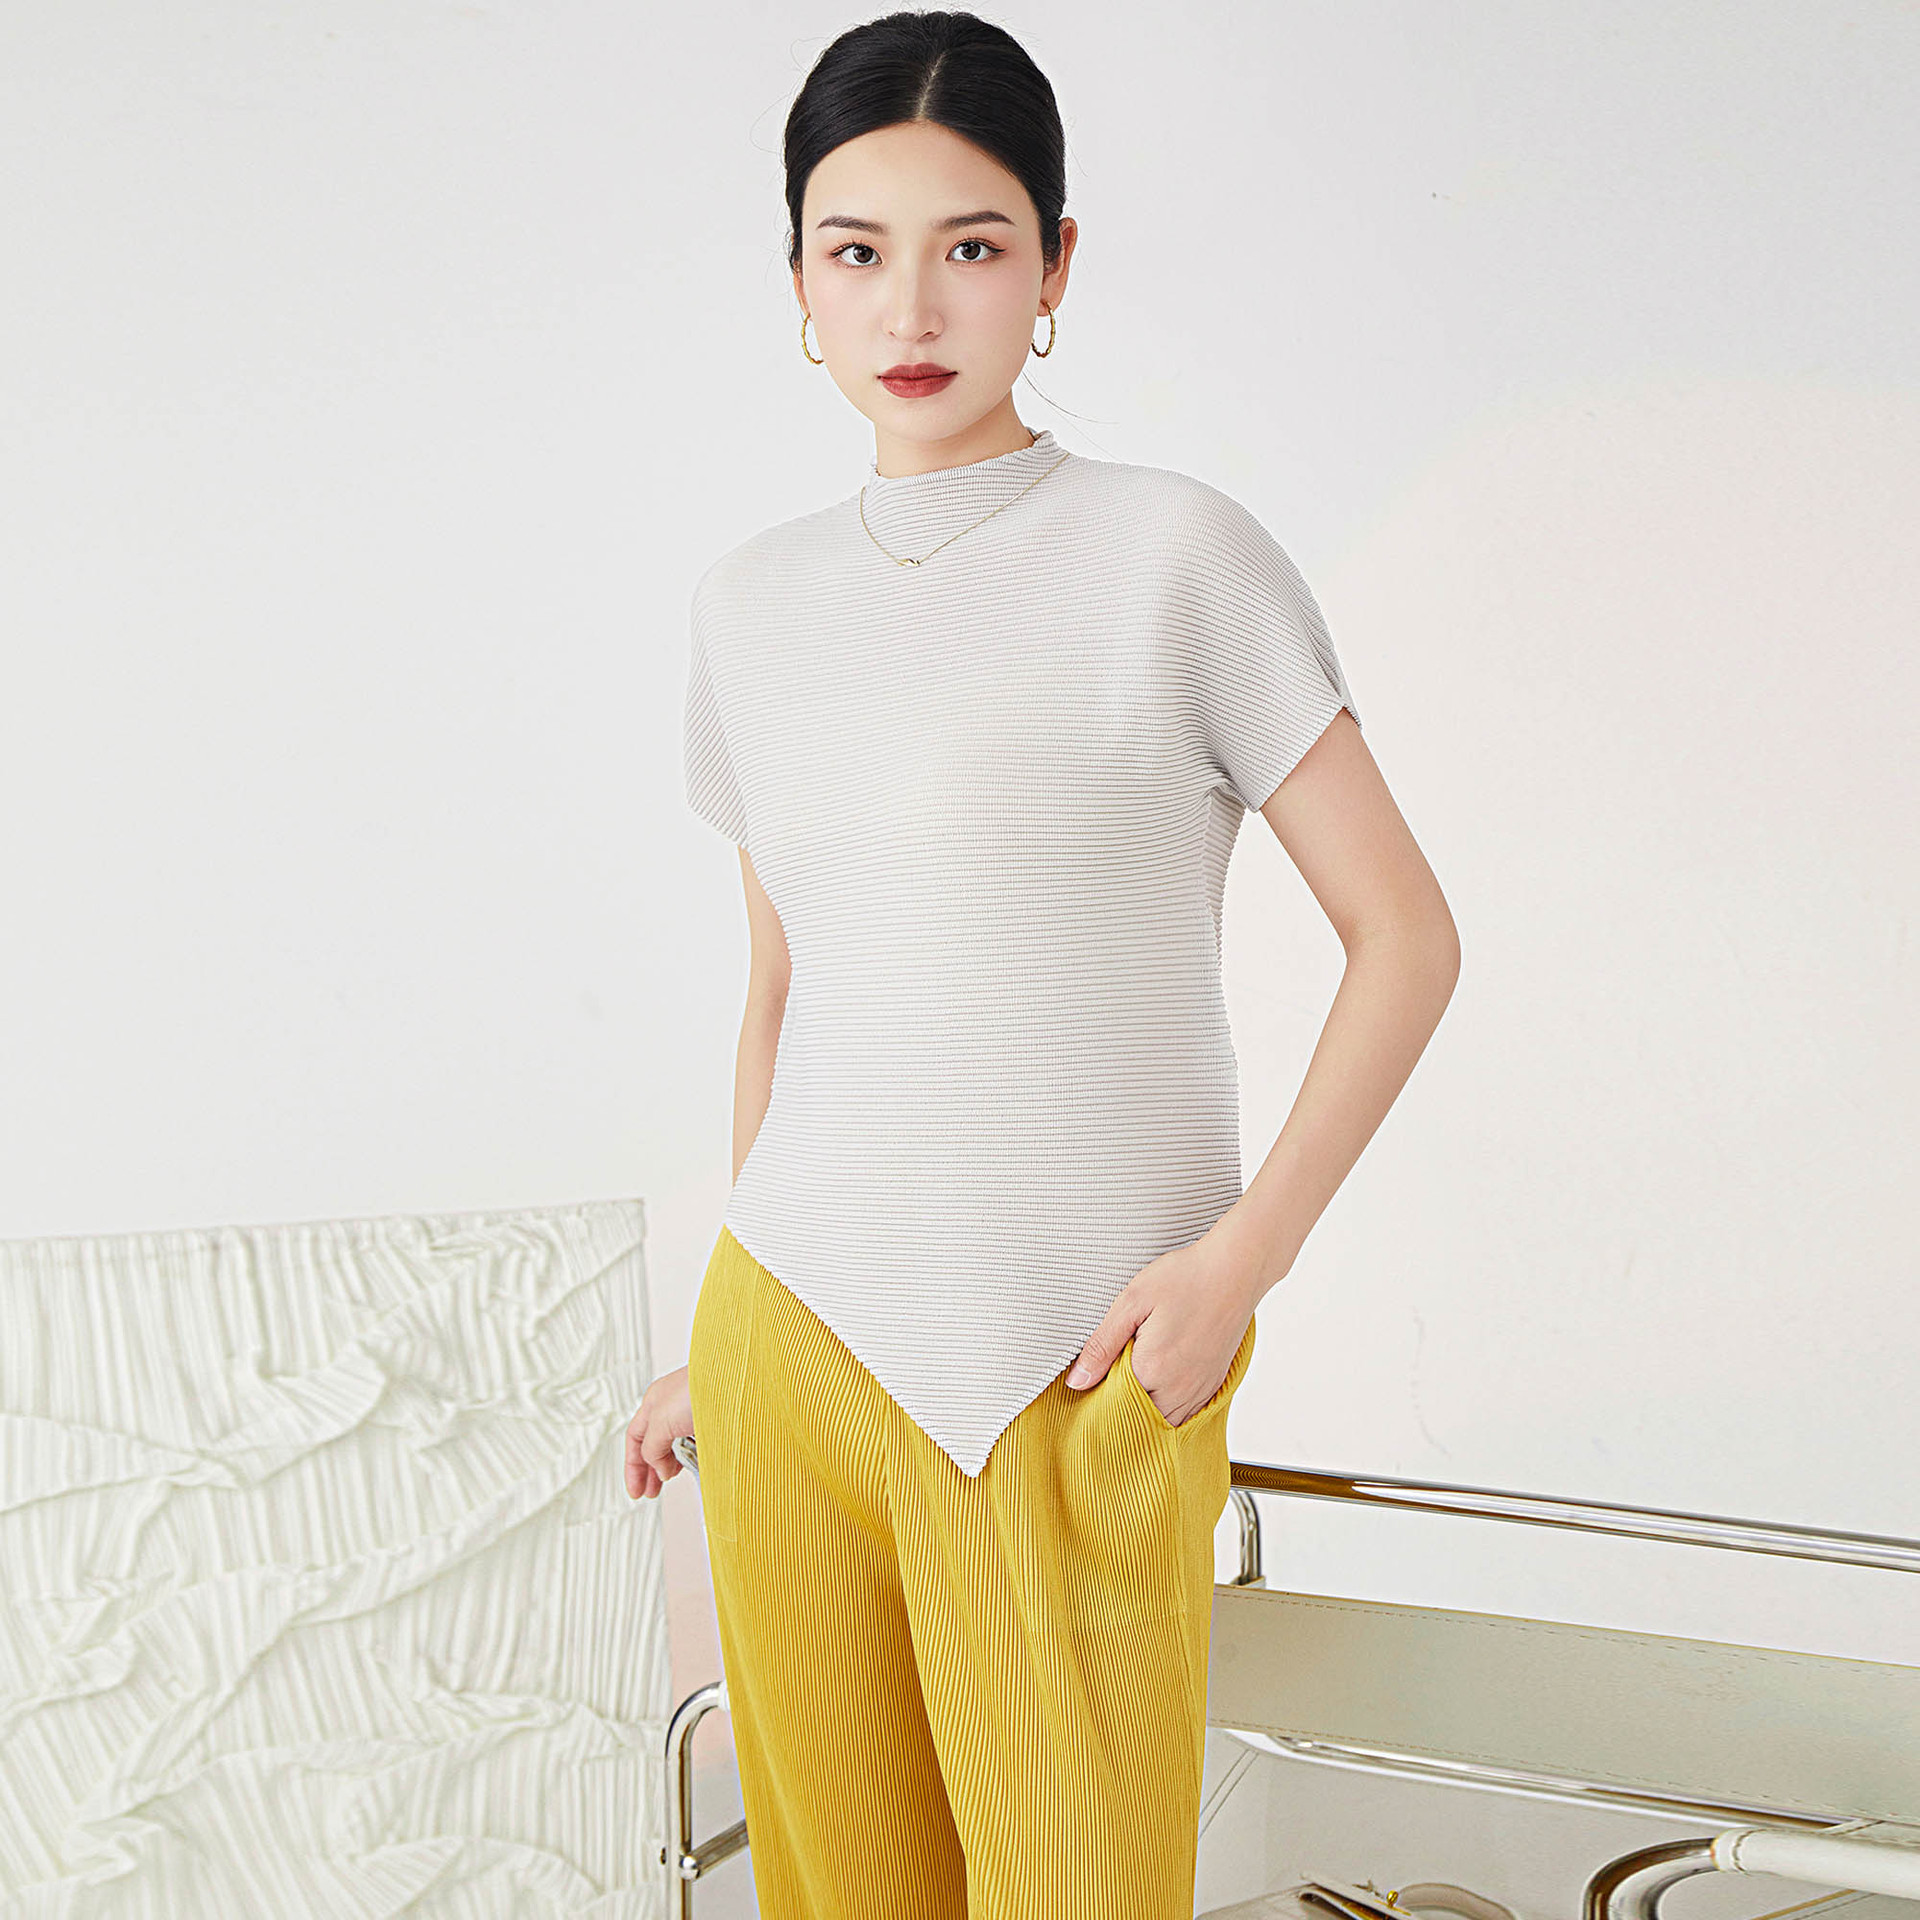 Minimalist Design Maximum Impact lady's fashion Fashion Tops Stand Out in our Bold and Daring Tops